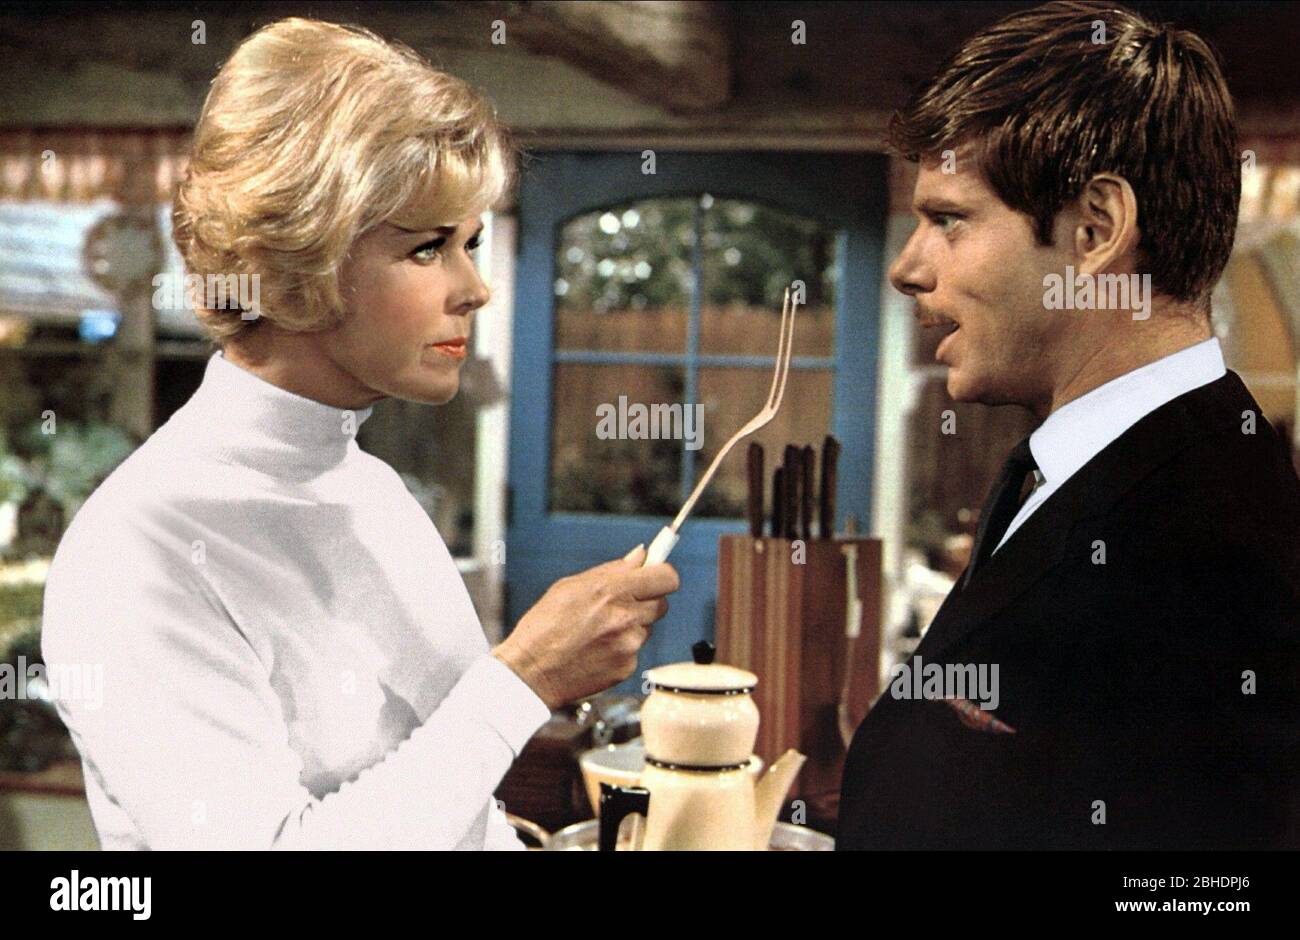 DORIS DAY, ROBERT MORSE, WHERE WERE YOU WHEN THE LIGHTS WENT OUT?, 1968  Stock Photo - Alamy